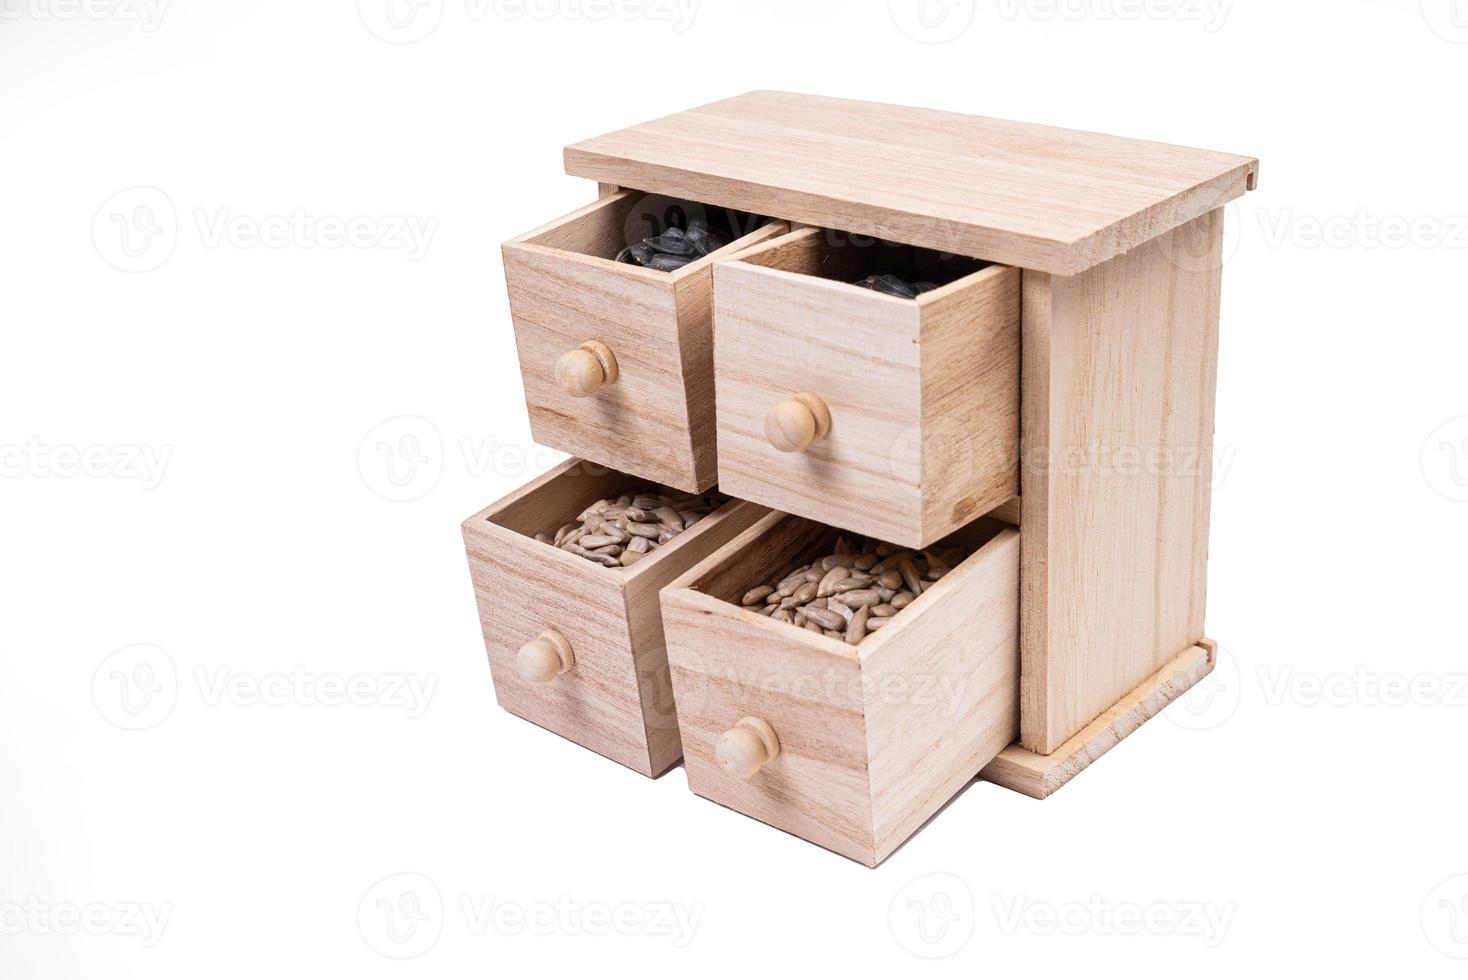 Wooden box cells filled with various spices. wooden box with sunflower seeds, peeled and raw photo